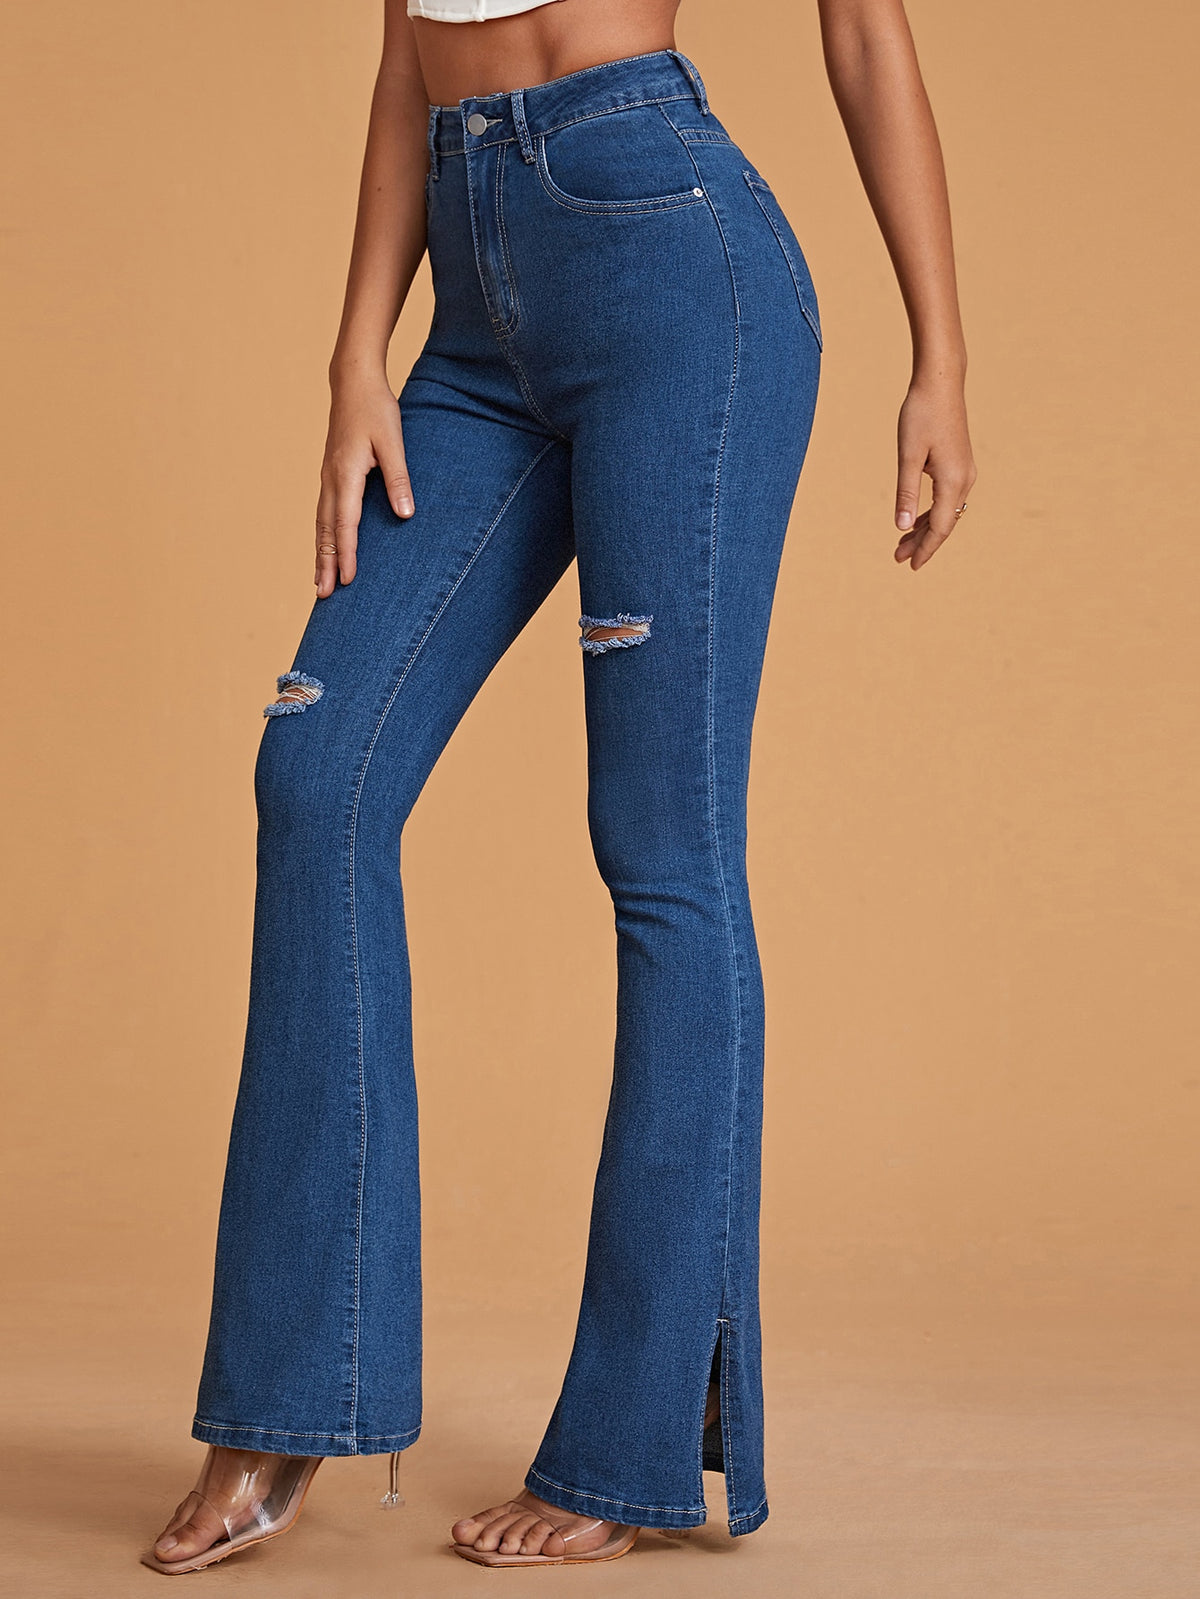 Ripped Flare Leg Jeans with High Waist - Medium Wash / L